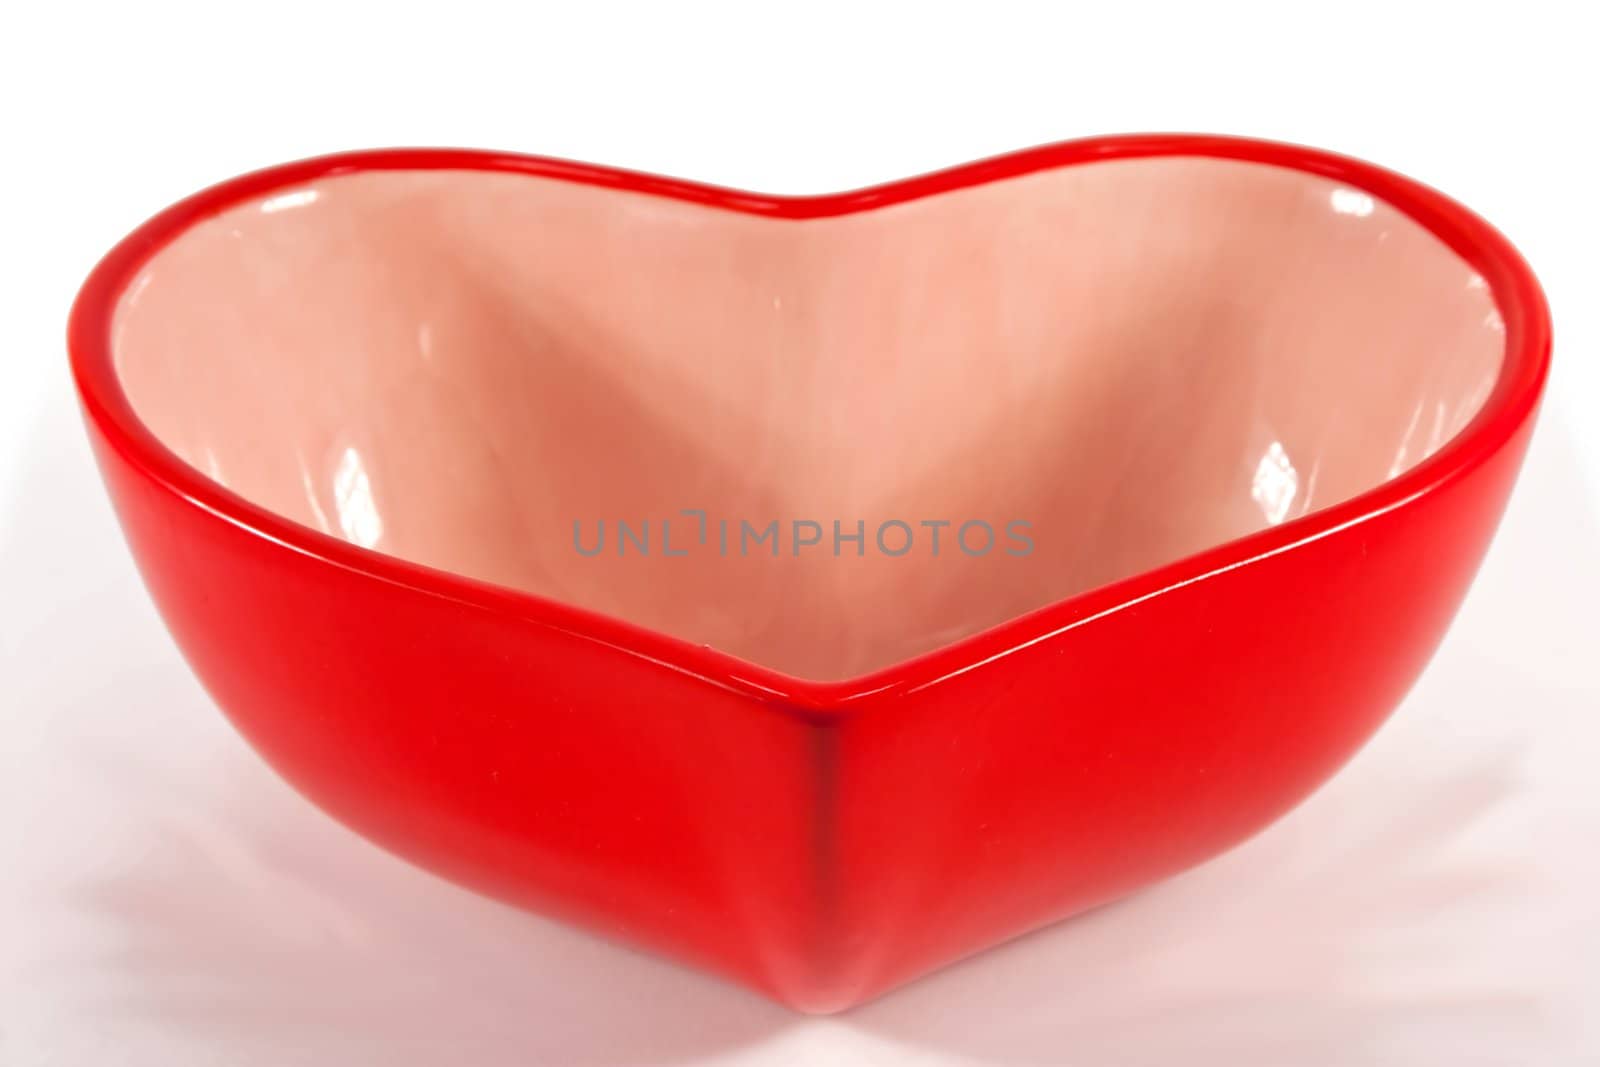 Heart shaped bowl by timscottrom